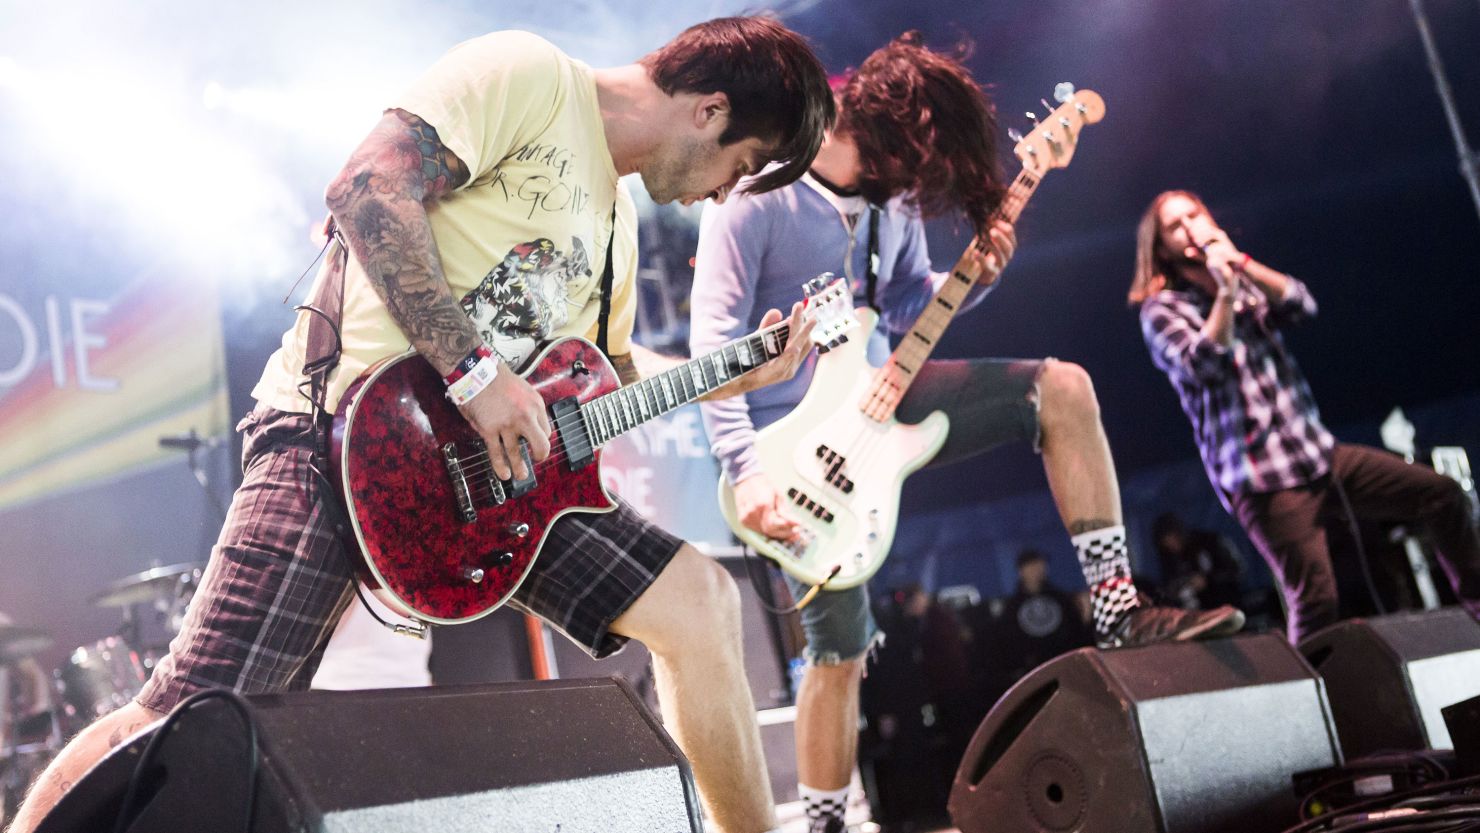 L-R) Jordan Buckley, Stephen Micciche and Keith Buckley of American hard rock group Every Time I Die performing live on the Maverick Stage at Download Festival, on June 13, 2015. 